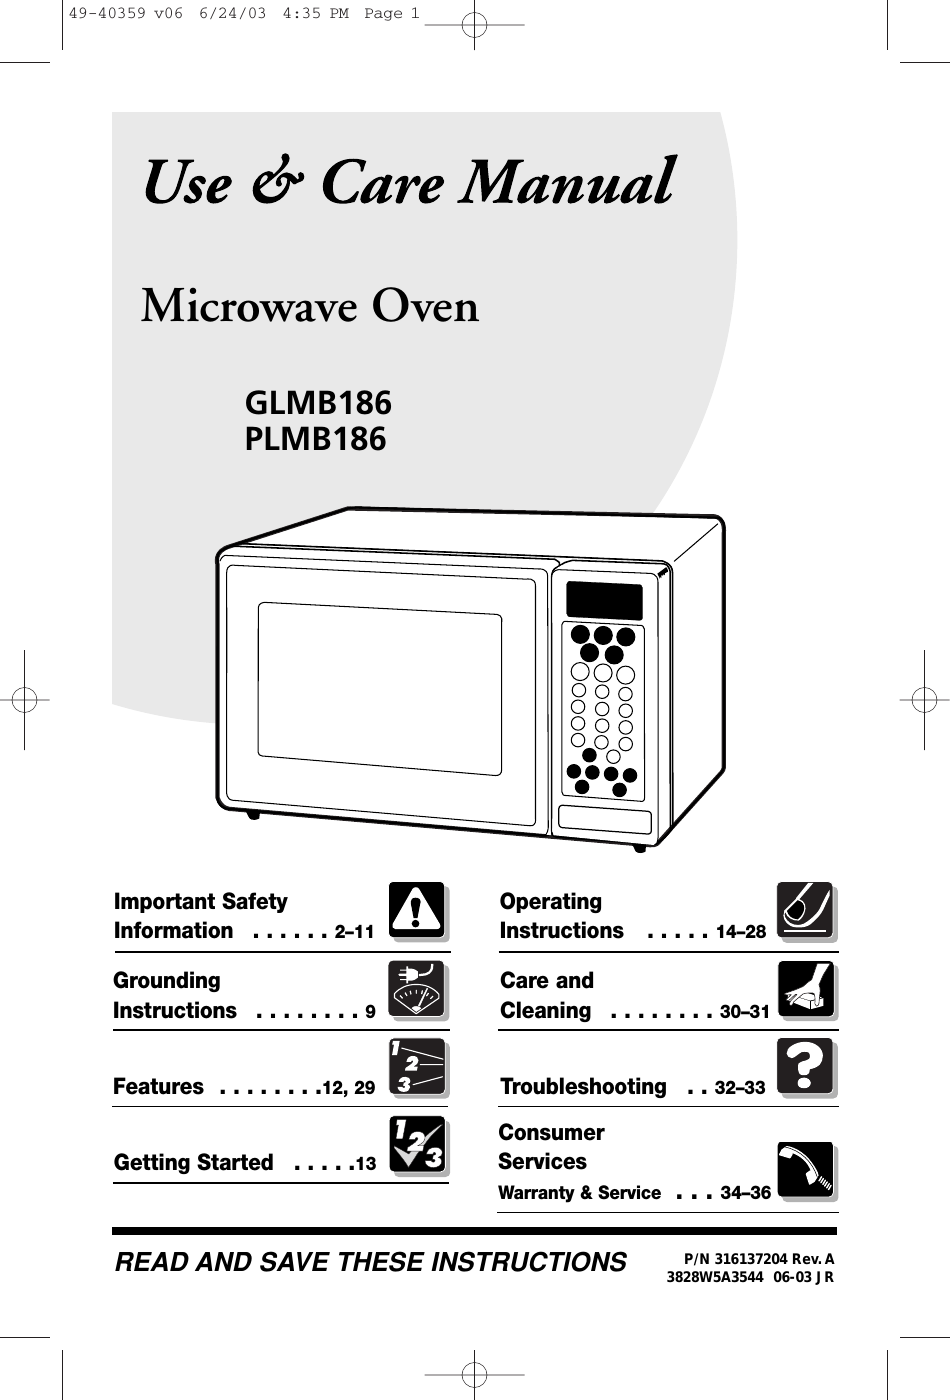 Microwave OvenImportant Safety Information  . . . . . . 2–11Grounding Instructions  . . . . . . . . 9Operating Instructions   . . . . . 14–28Features  . . . . . . . .12, 29Care and Cleaning   . . . . . . . . 30–31Troubleshooting   . . 32–33ConsumerServicesWarranty &amp; Service  . . . 34–36GLMB186PLMB186Getting Started  . . . . .13READ AND SAVE THESE INSTRUCTIONS P/N 316137204 Rev. A06-03 JR49-40359 v06  6/24/03  4:35 PM  Page 13828W5A3544